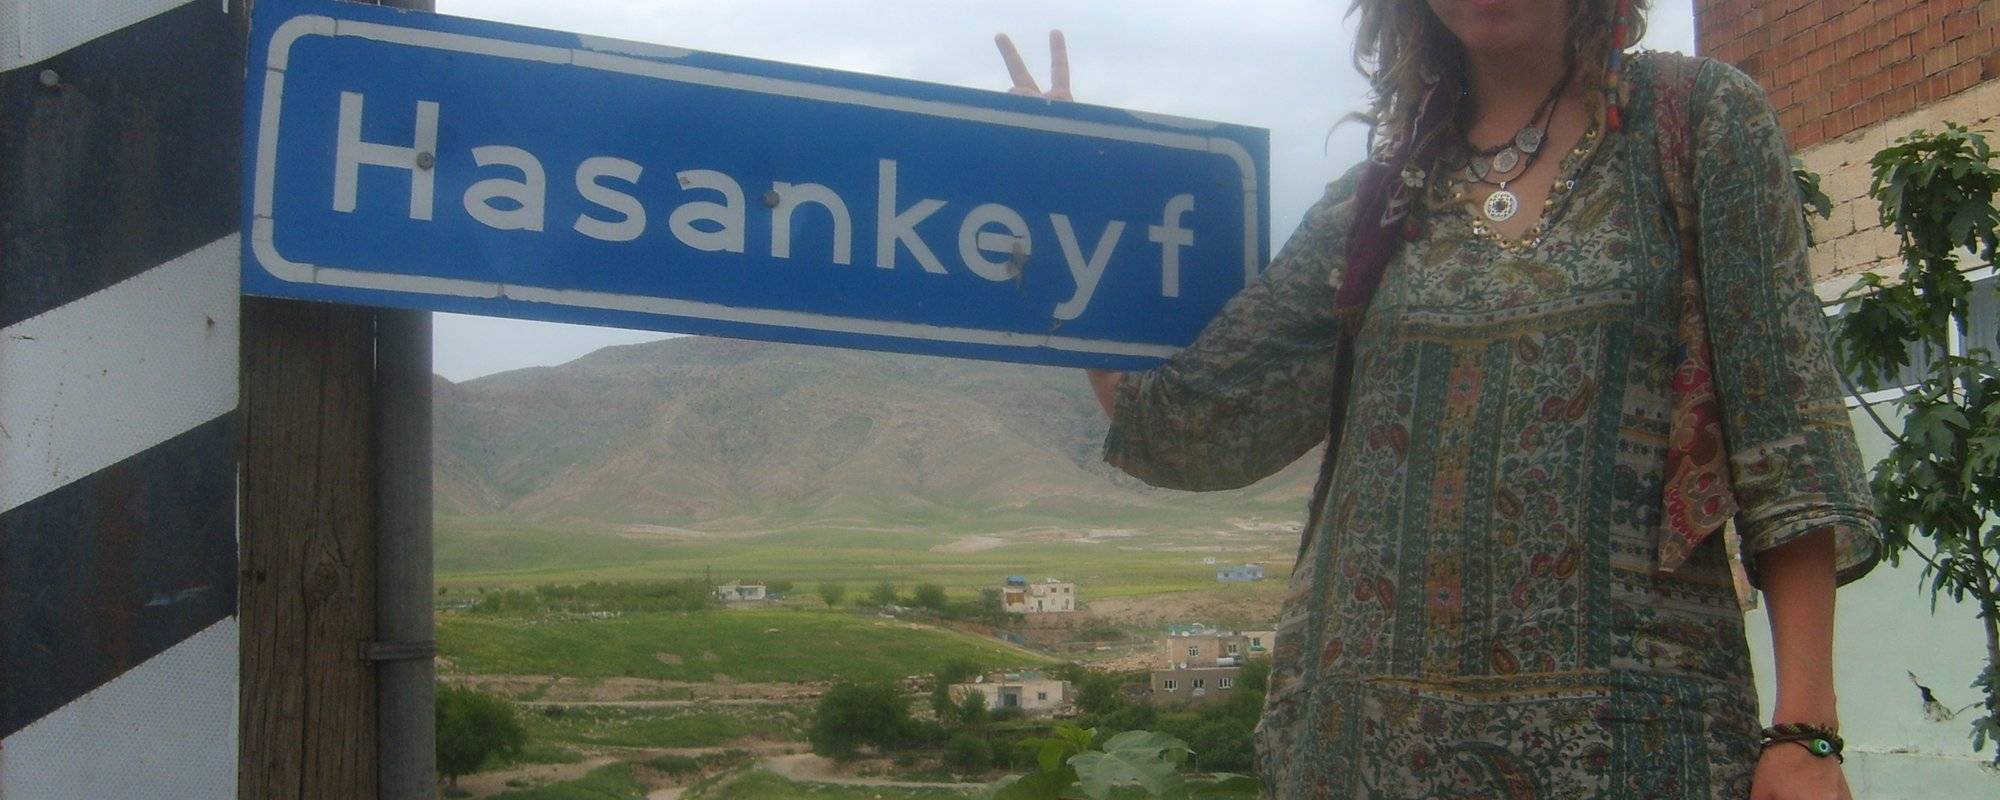 12,000 year old Settlement Covered By Water! - The Story About the Traveling Band CASPIAN CARAVAN and the Story Overland To India part #8 - Hasankeyf, Turkey